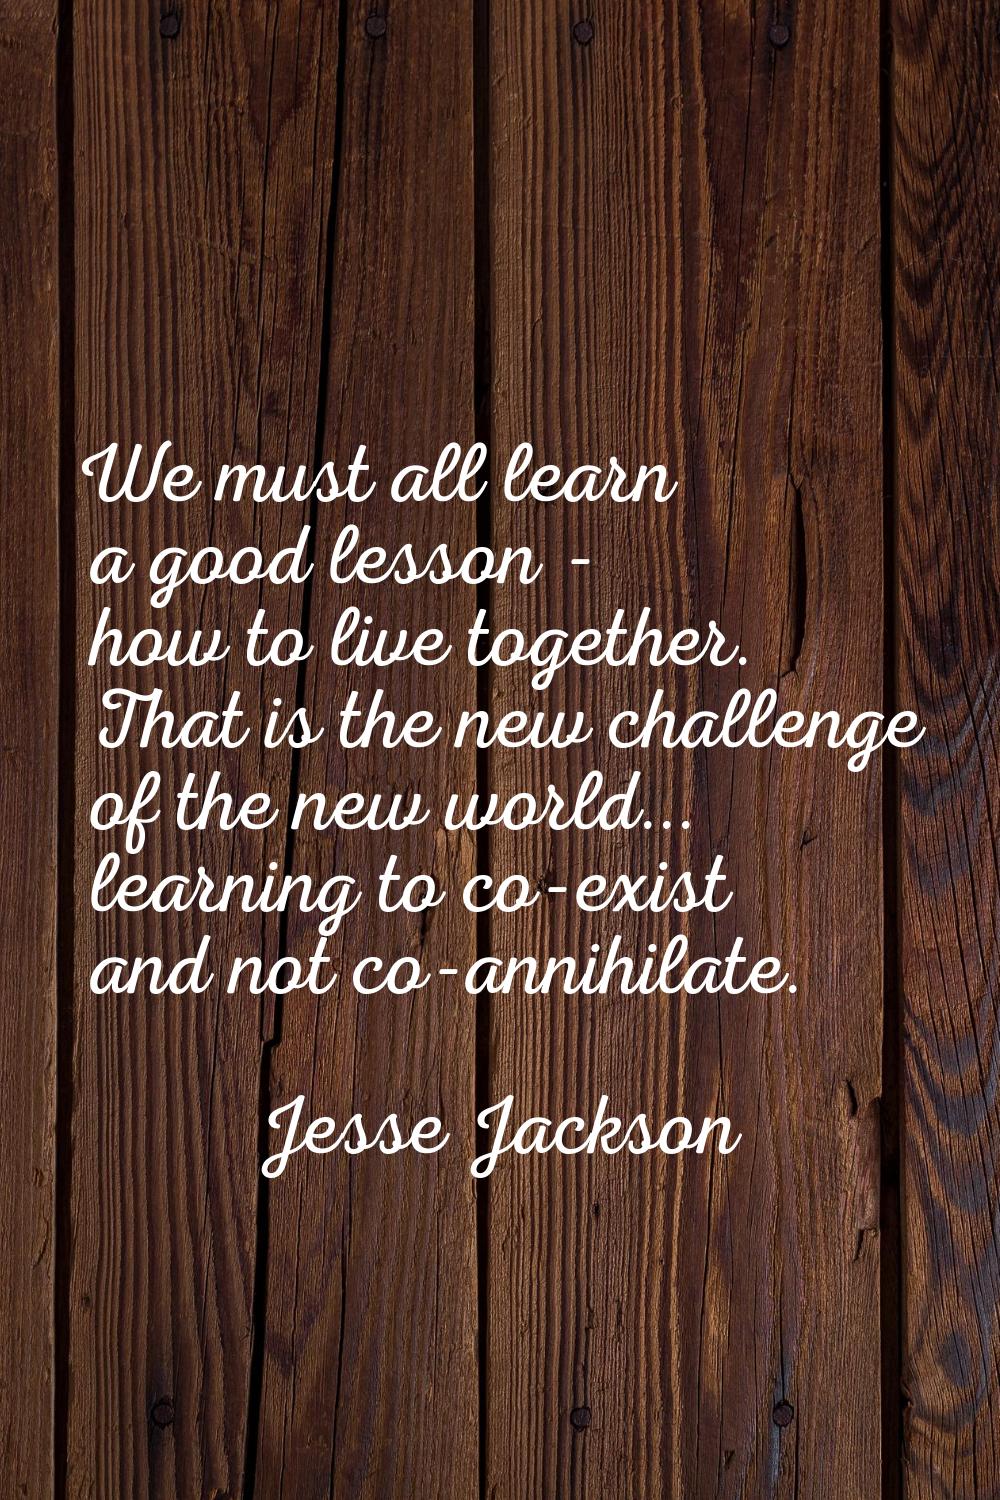 We must all learn a good lesson - how to live together. That is the new challenge of the new world.